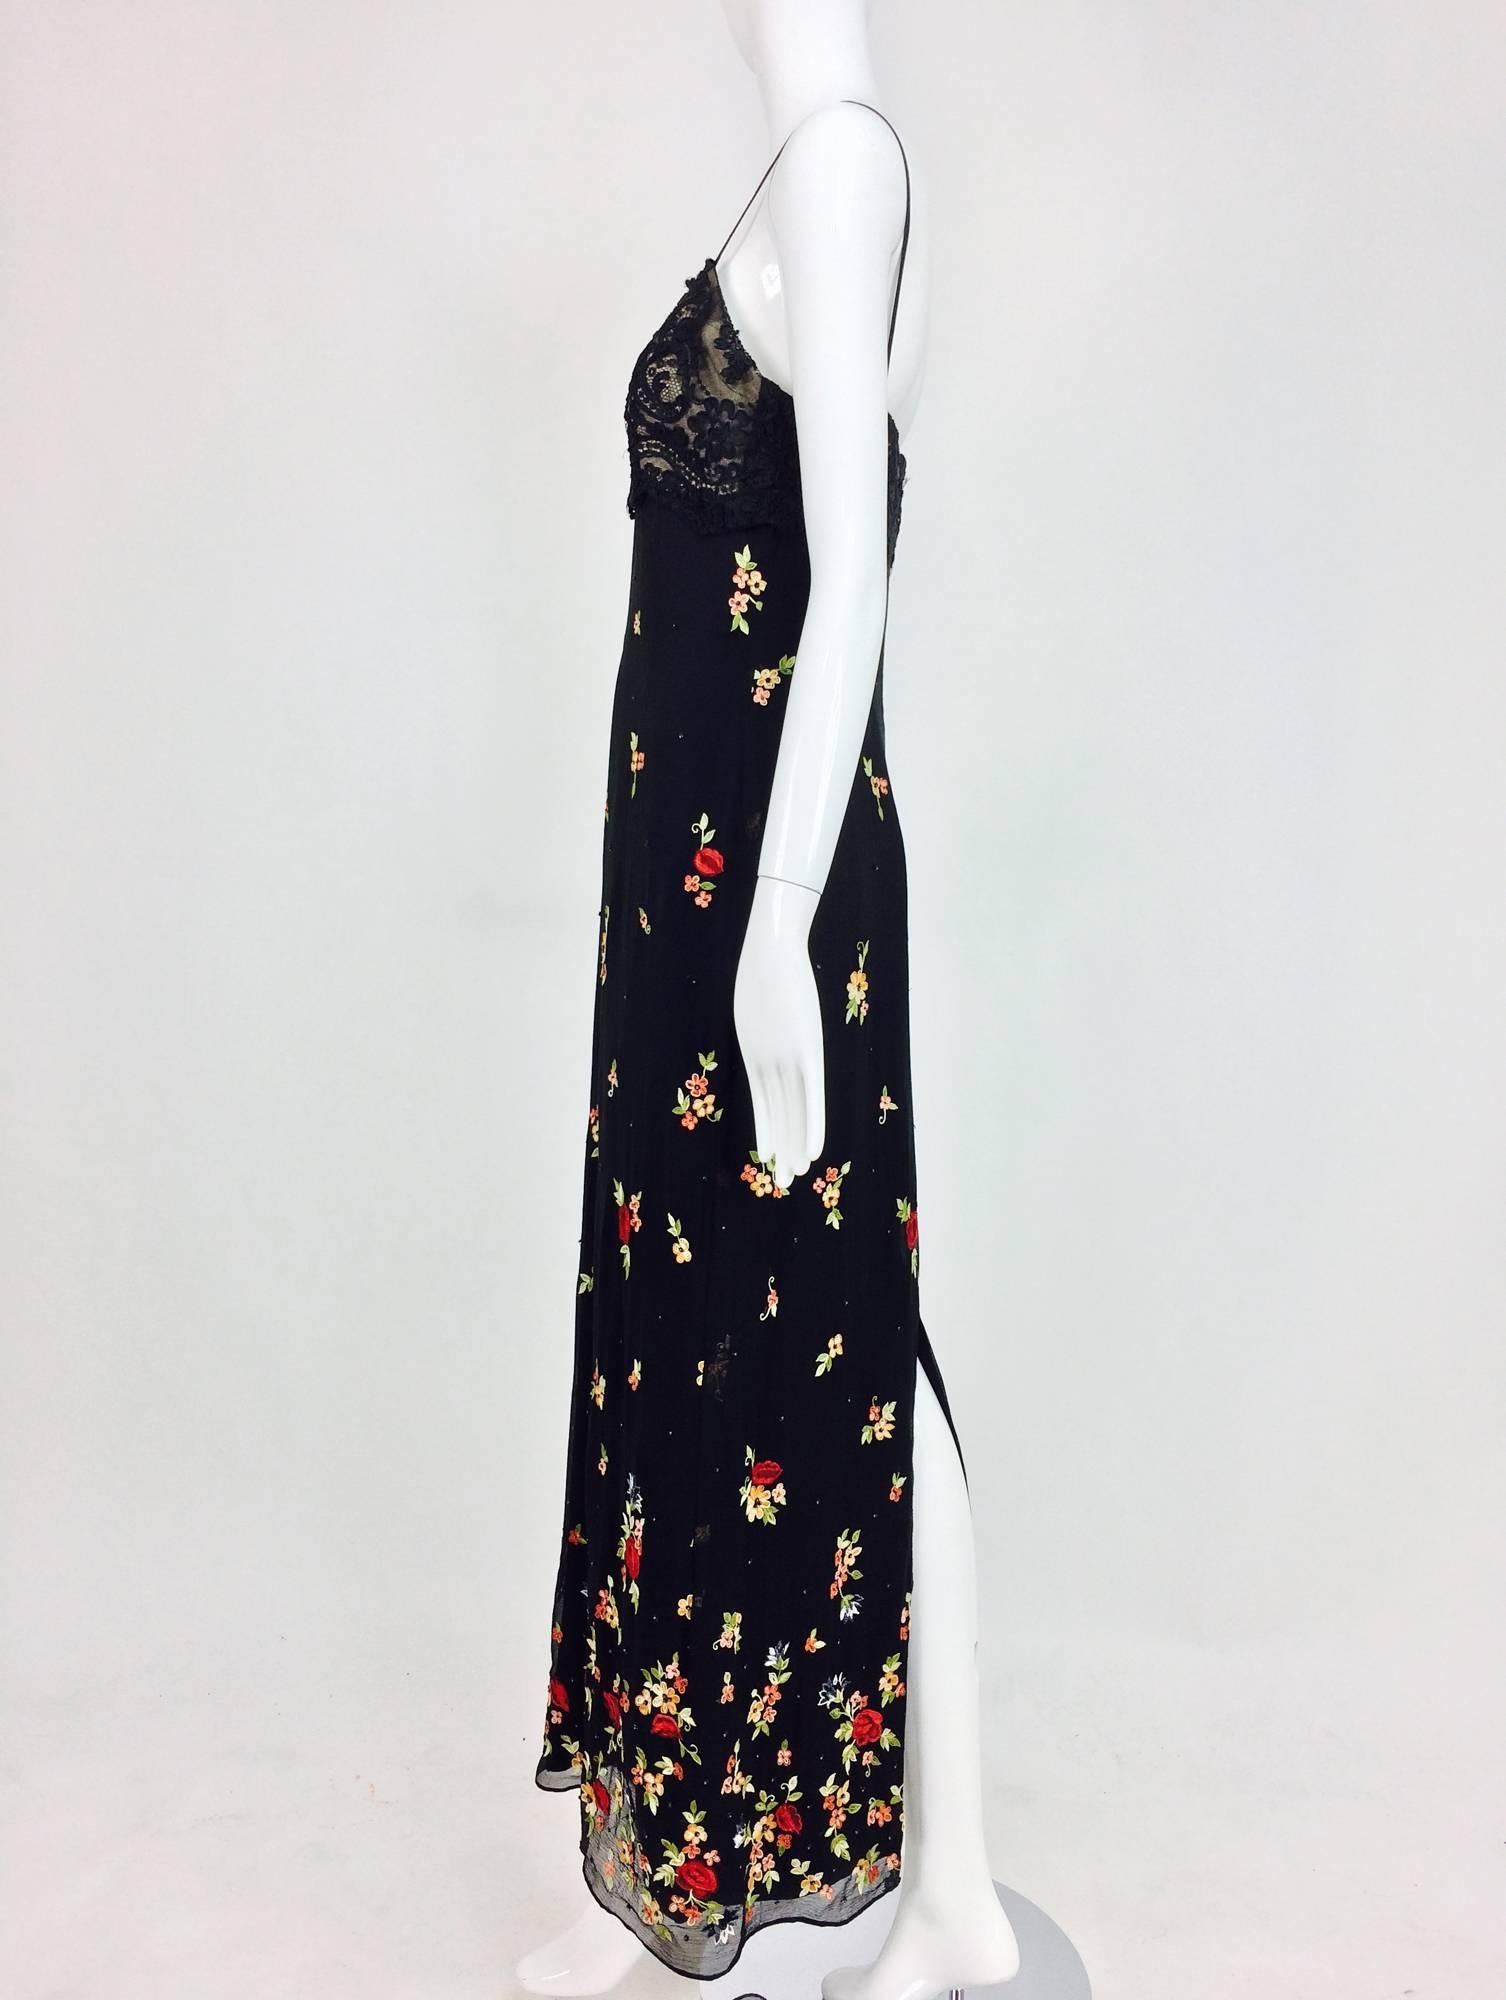 Bellville Sassoon maxi dress designed by Lorcan Mullany. Empire style dress with a black guipure lace bodice, narrow shoulder straps and a long column of beautifully floral embroidered and beaded black silk chiffon. The dress has a deep back hem